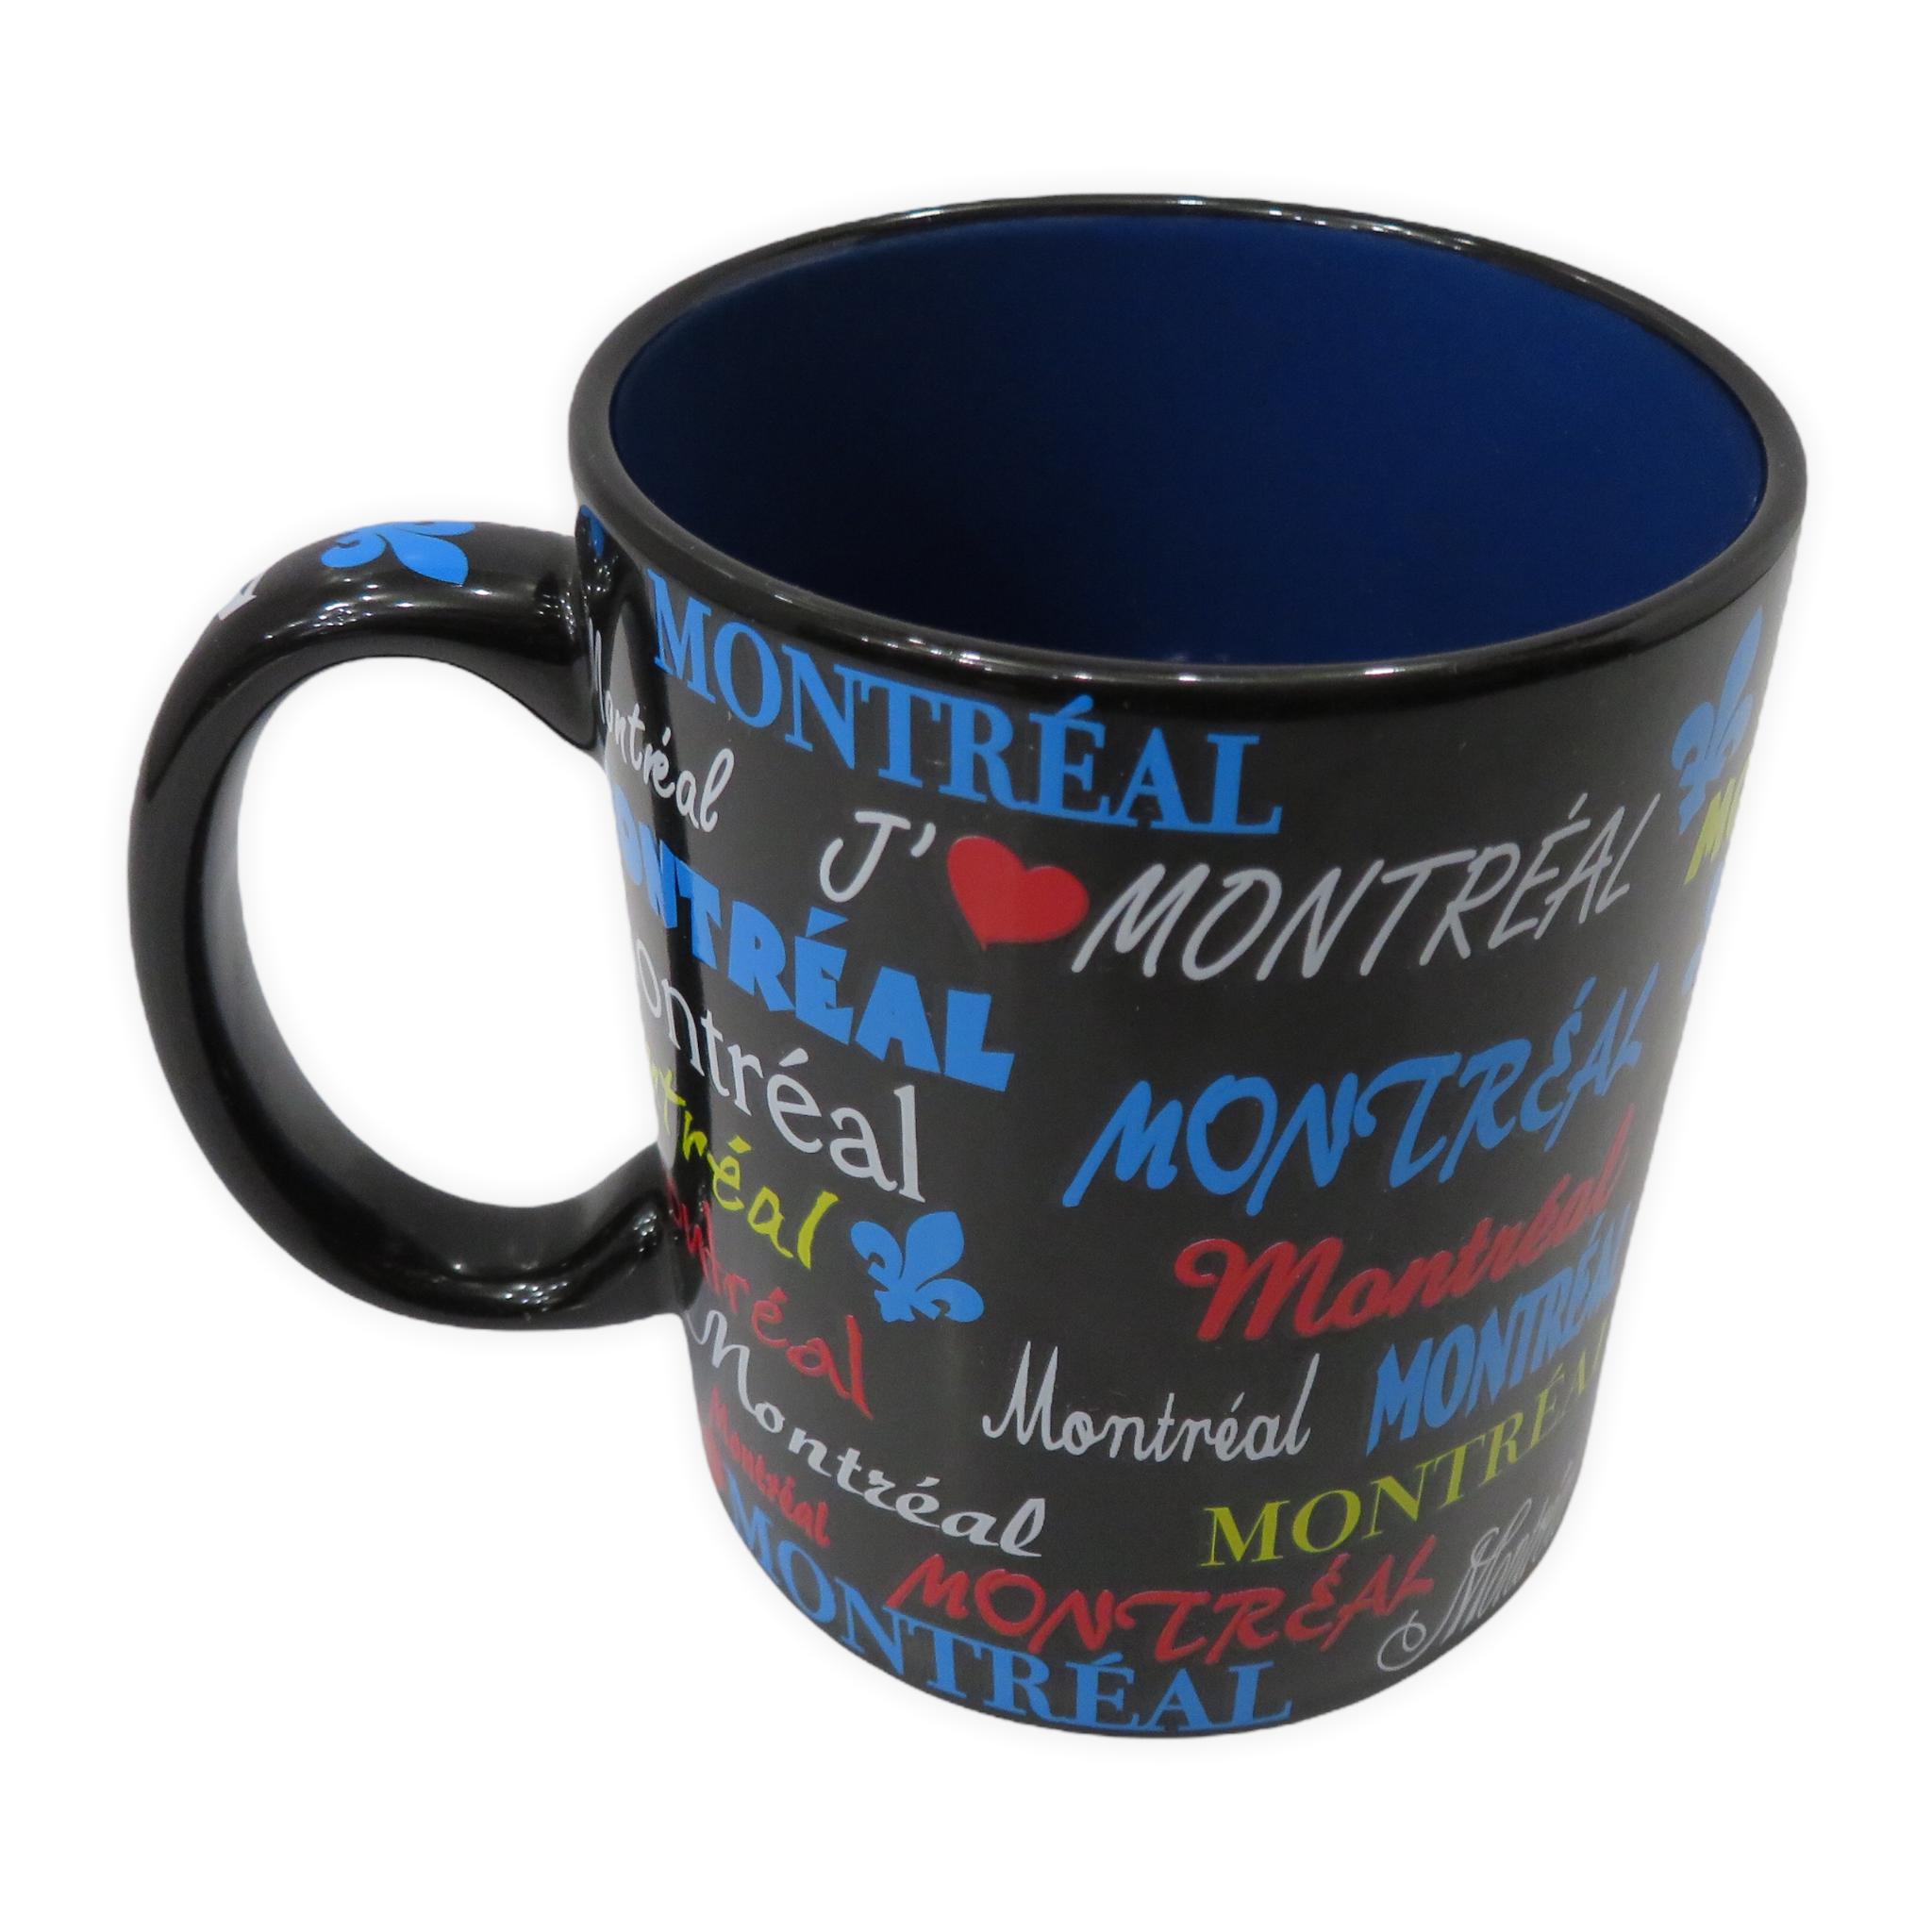 Montreal and Canada Mugs with Glitter Themed Design Coffee Mug | Glitter Ceramic Cup Printed on All Sides | Canadian Cups for Hot and Cold Drinks and Tea Lovers (Canada)